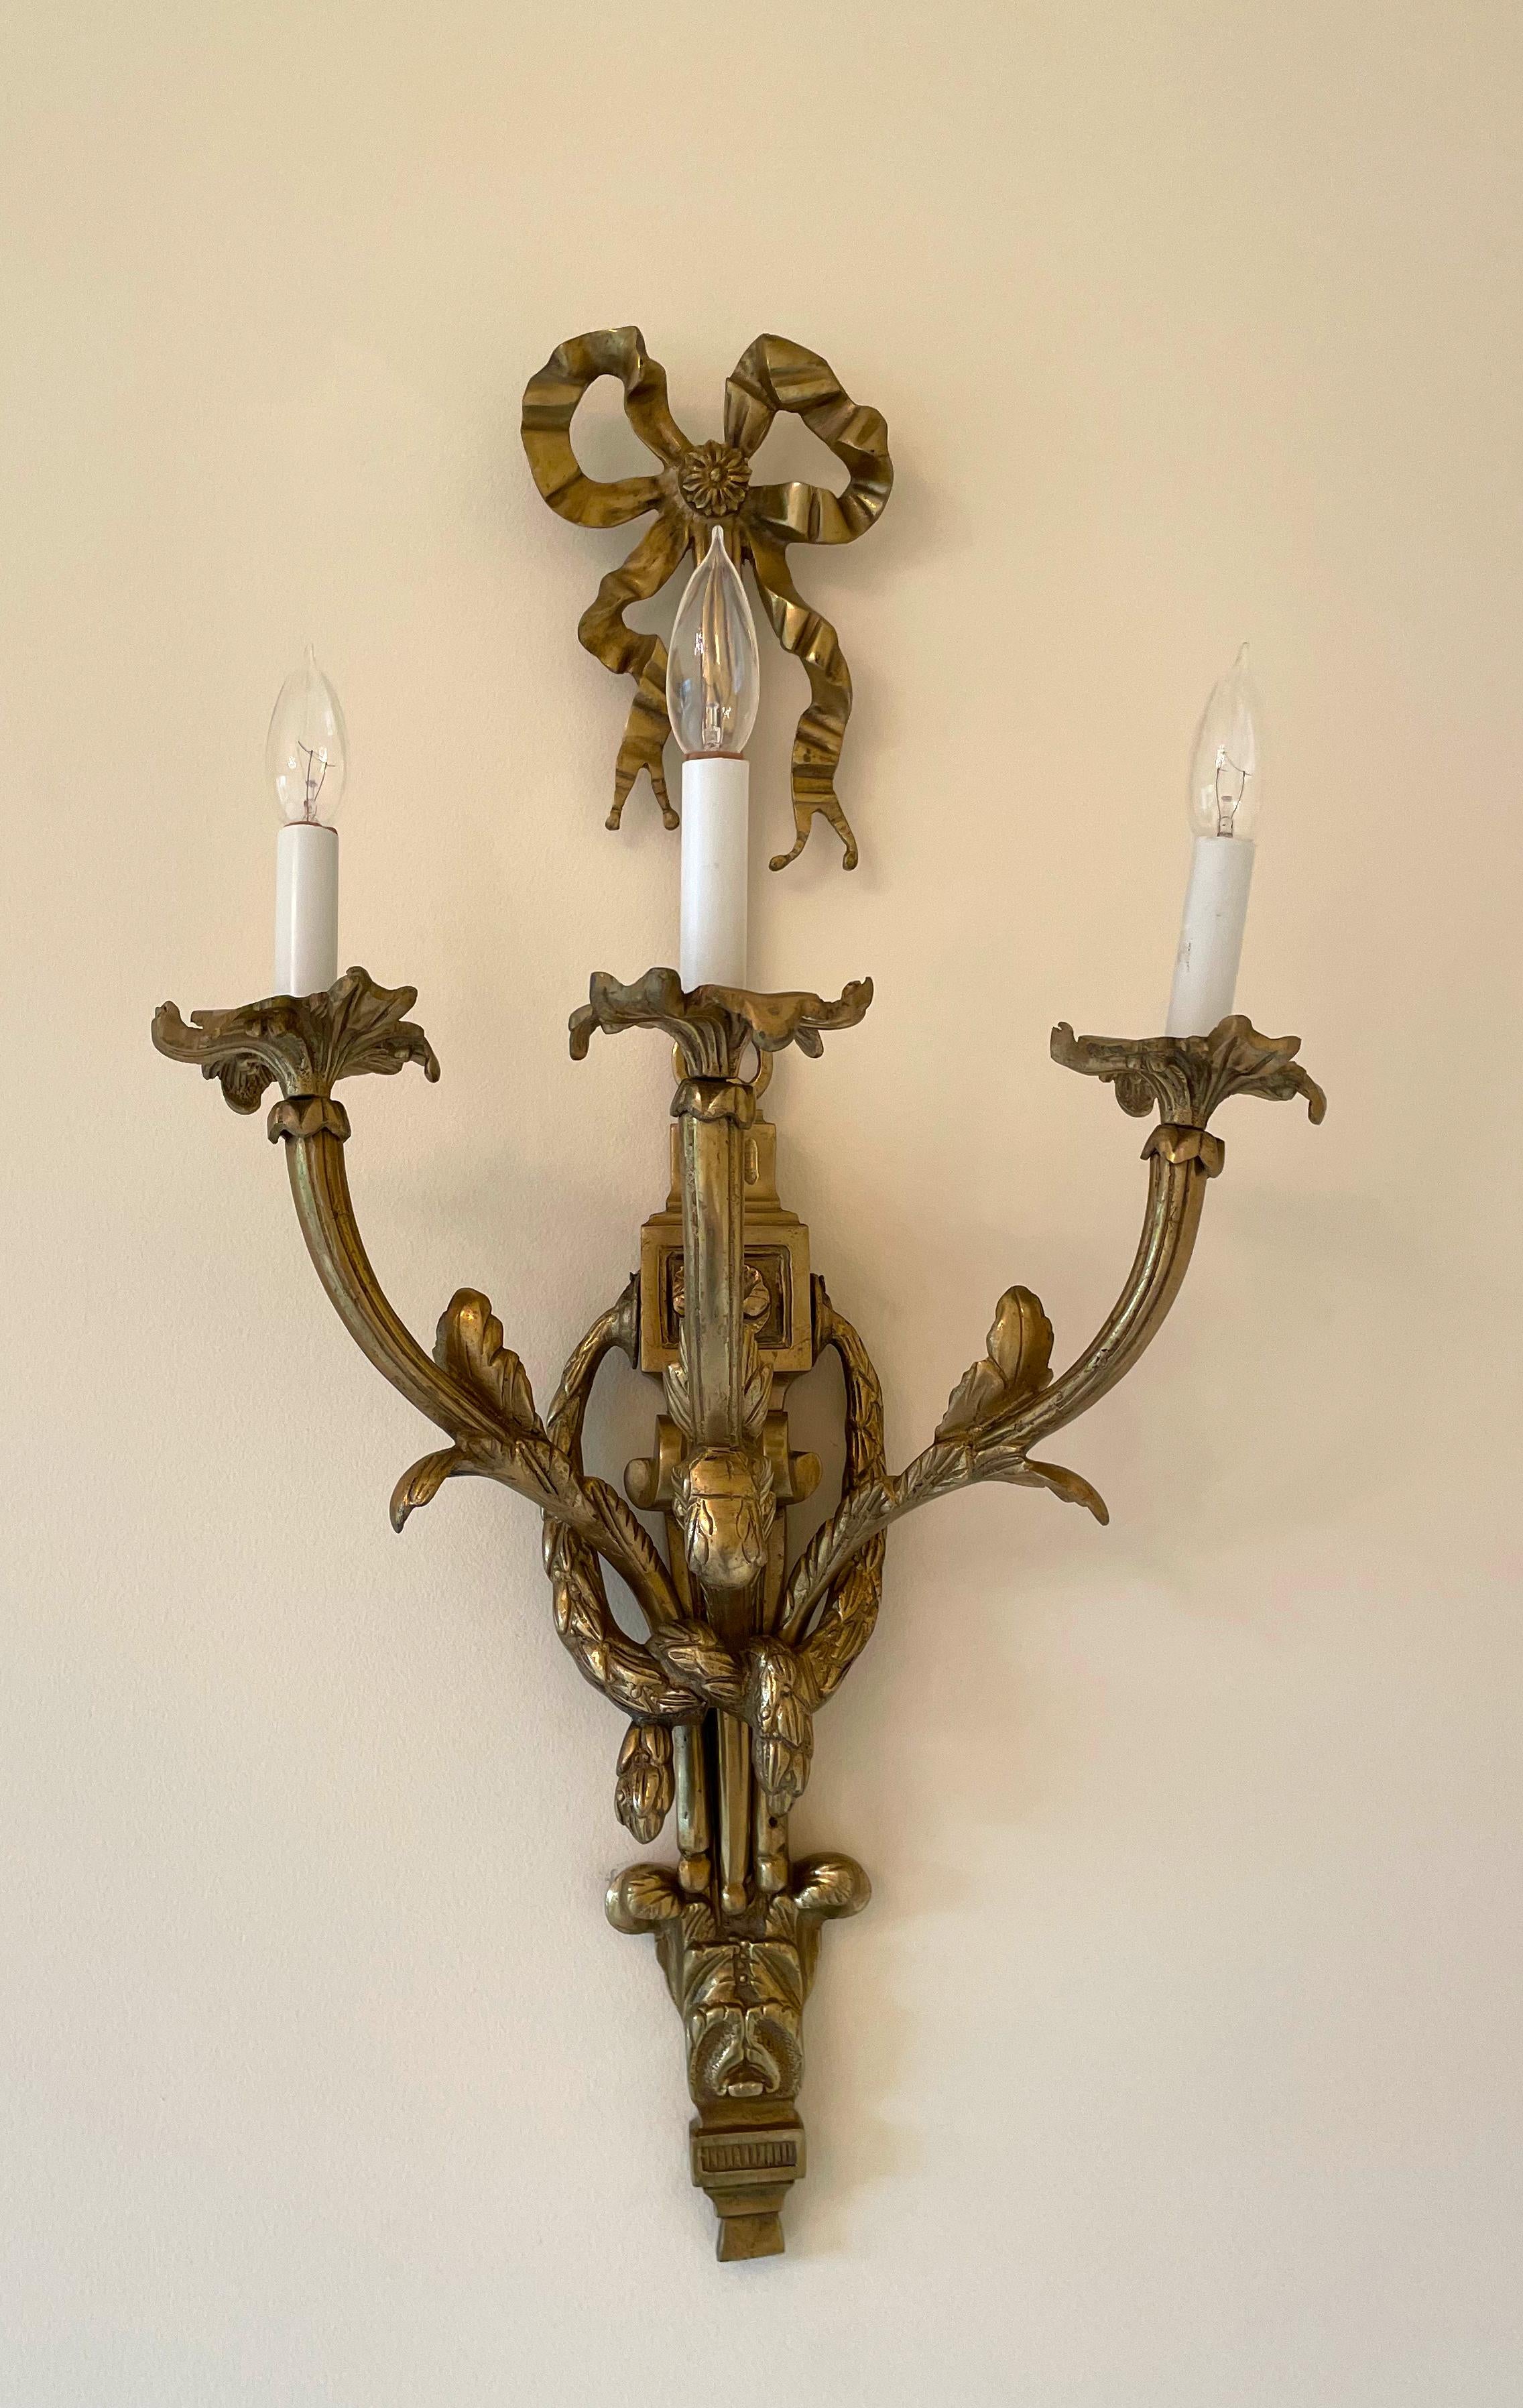 
Pair of Louis XVI Style Bronze Wall Lights
The backplate cast as bow-tied ribbons, supporting scrolled arms. 
800 Height 32 in. (81.28 cm.), Width 15 in (38.1 cm.), Depth 8 in. (20.32 cm.) (approx)
